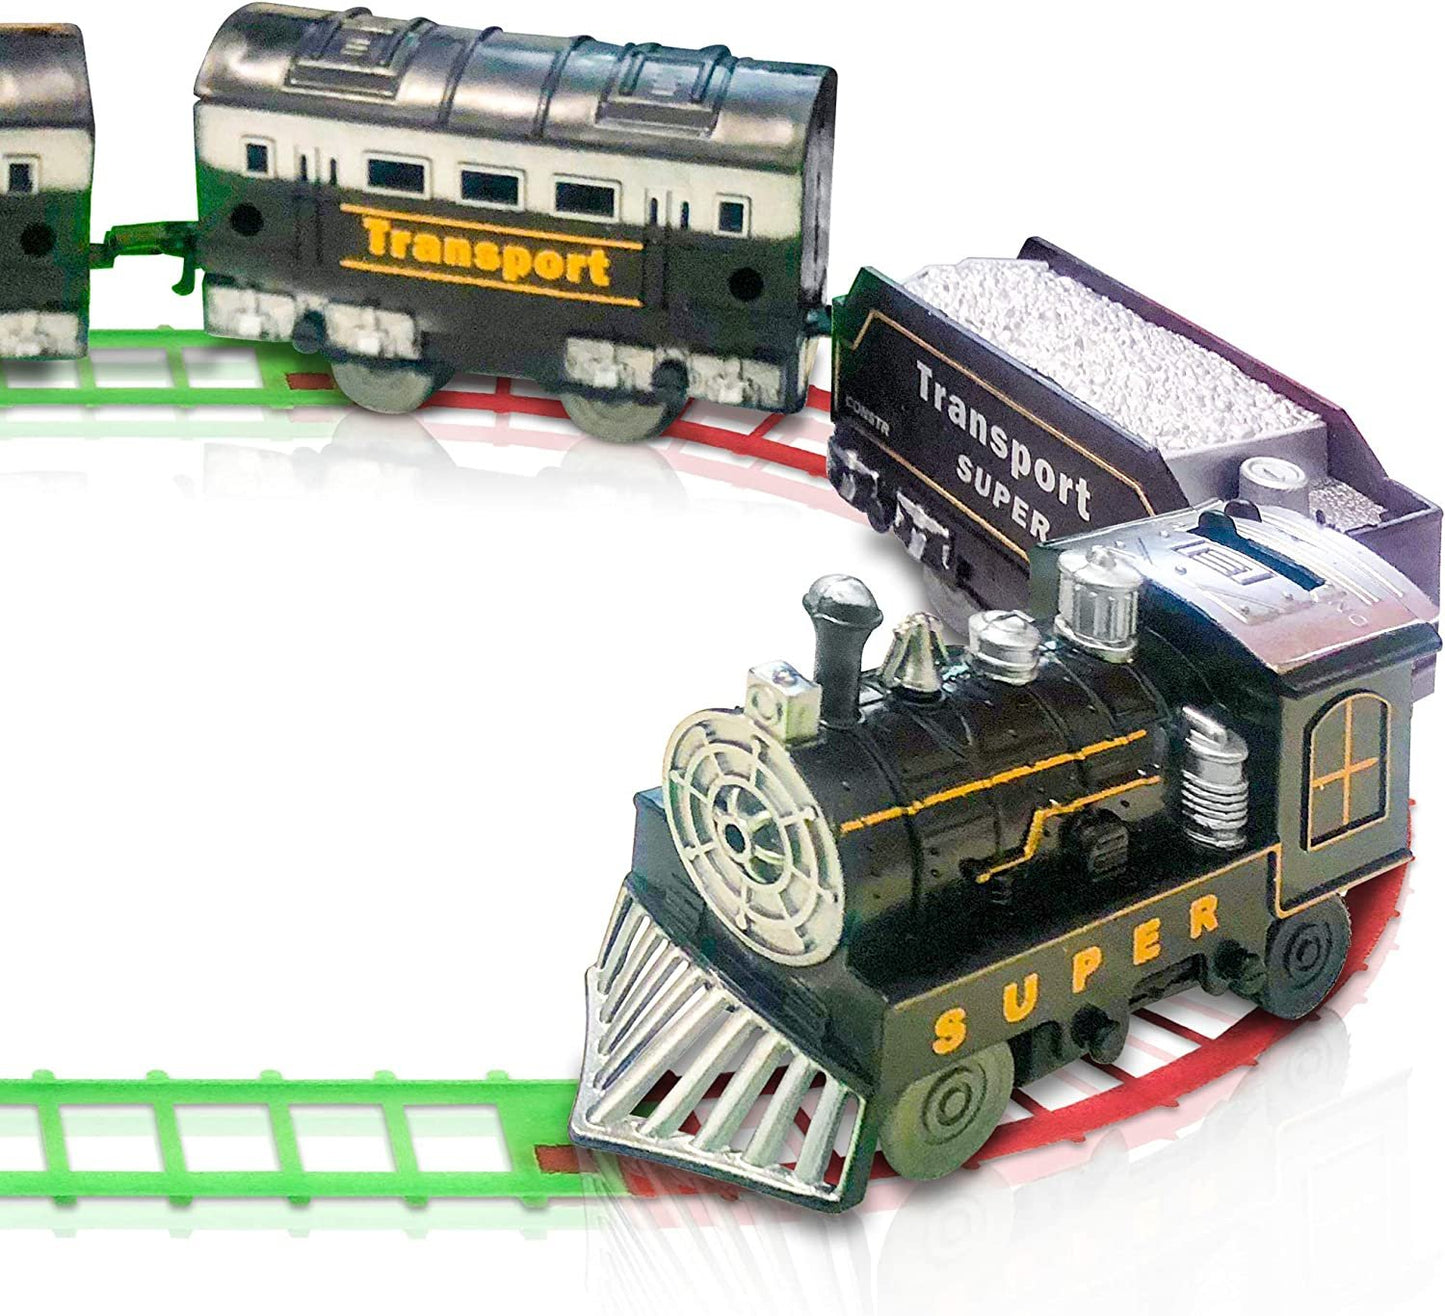 ArtCreativity Train Set for Kids, Battery-Operated Toy Train with 4 Cars and Tracks, Durable Plastic, Cute Christmas Holiday Train for Under The Tree, Great Gift Idea for Boys and Girls